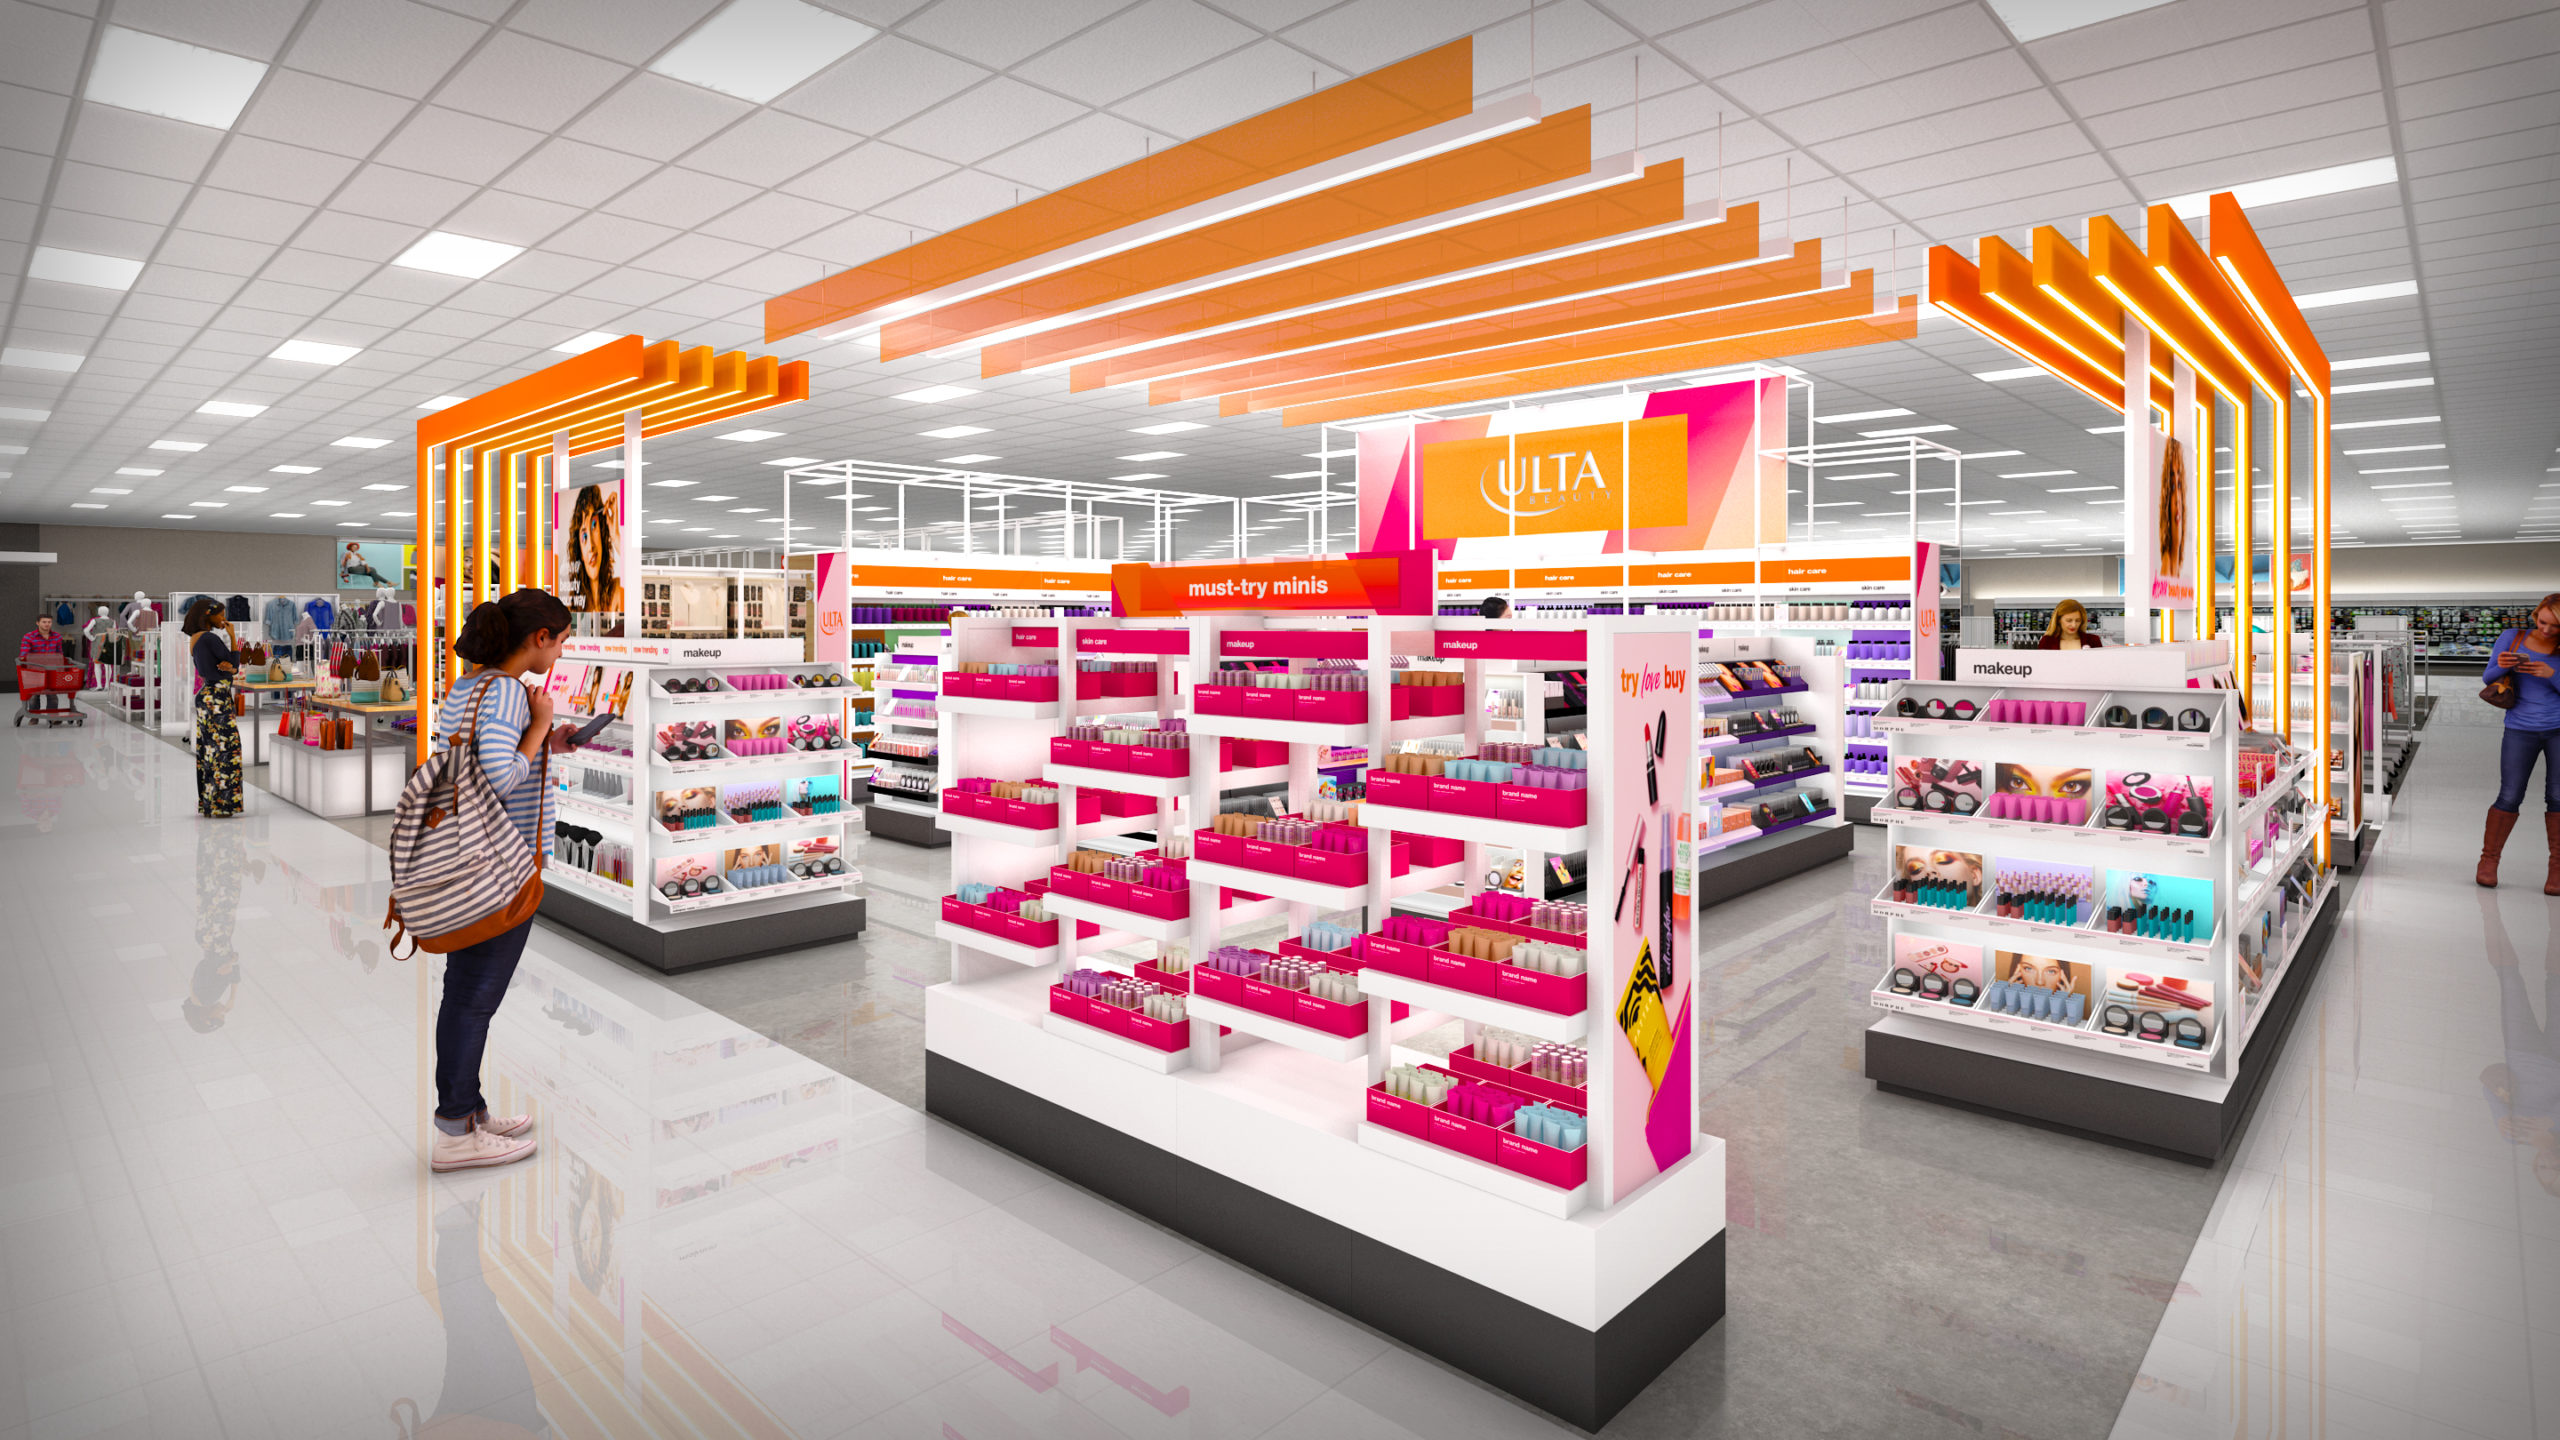 Customer viewing products in Target brand merger with Ulta